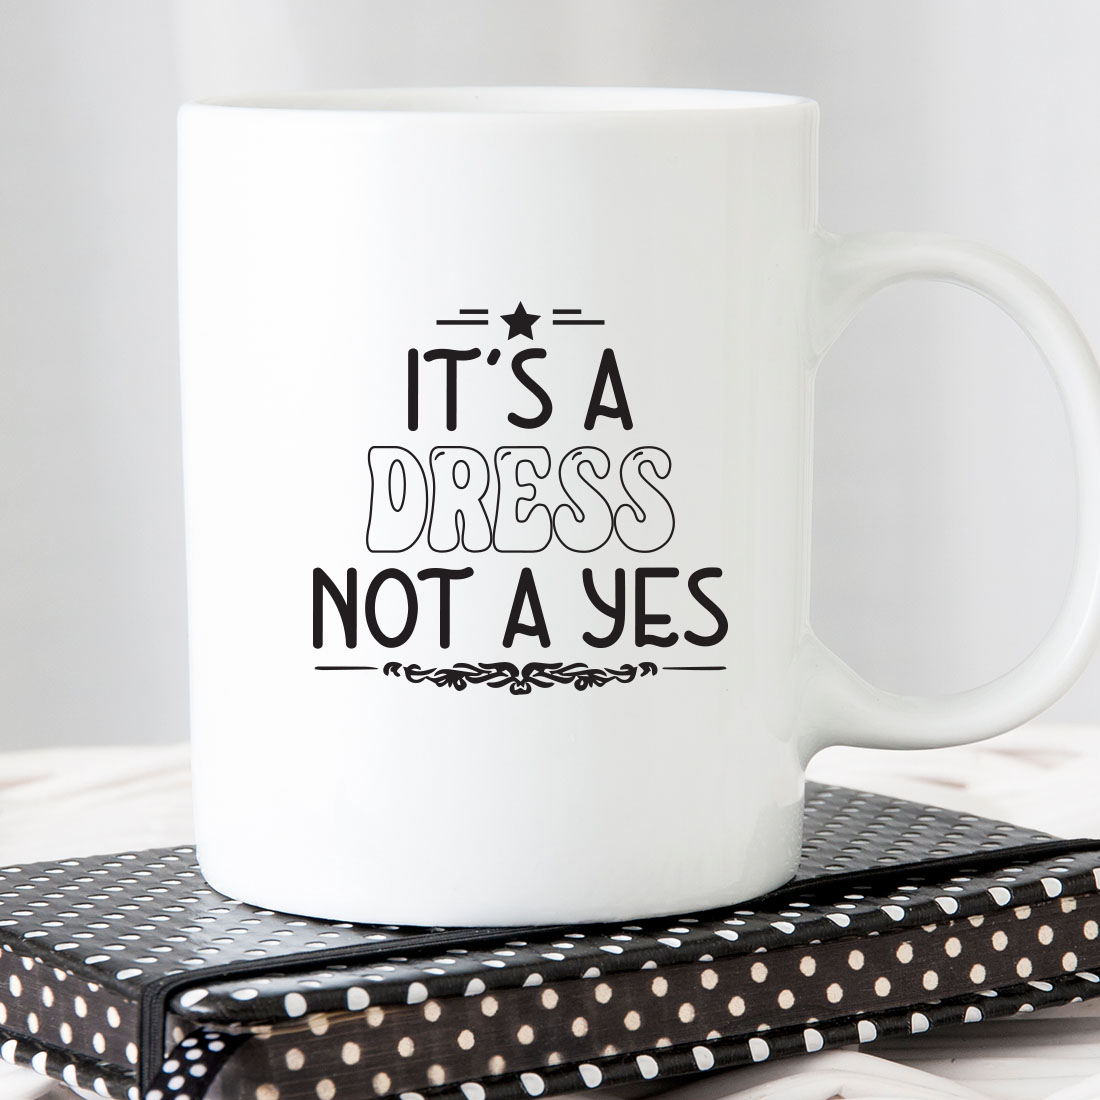 White coffee mug that says it's a dress not a yes.